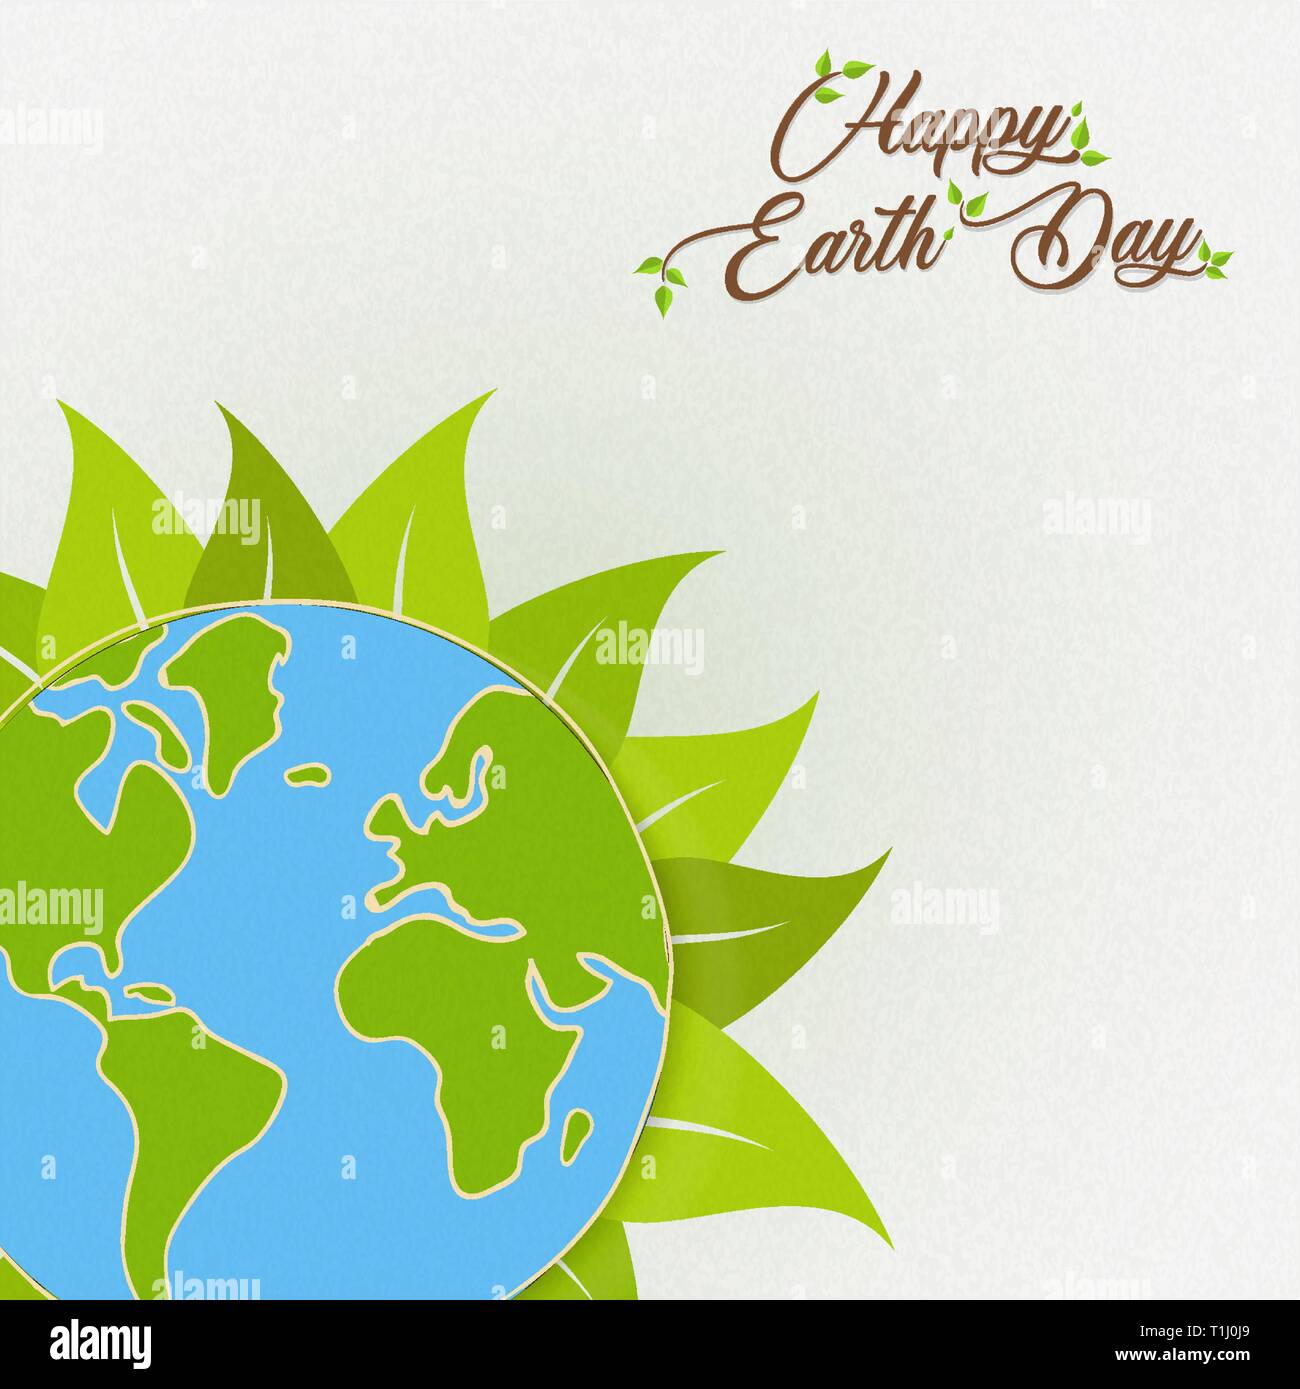 International Happy Earth Day illustration. Green planet with plant leaves for nature care and environment help. Stock Vector